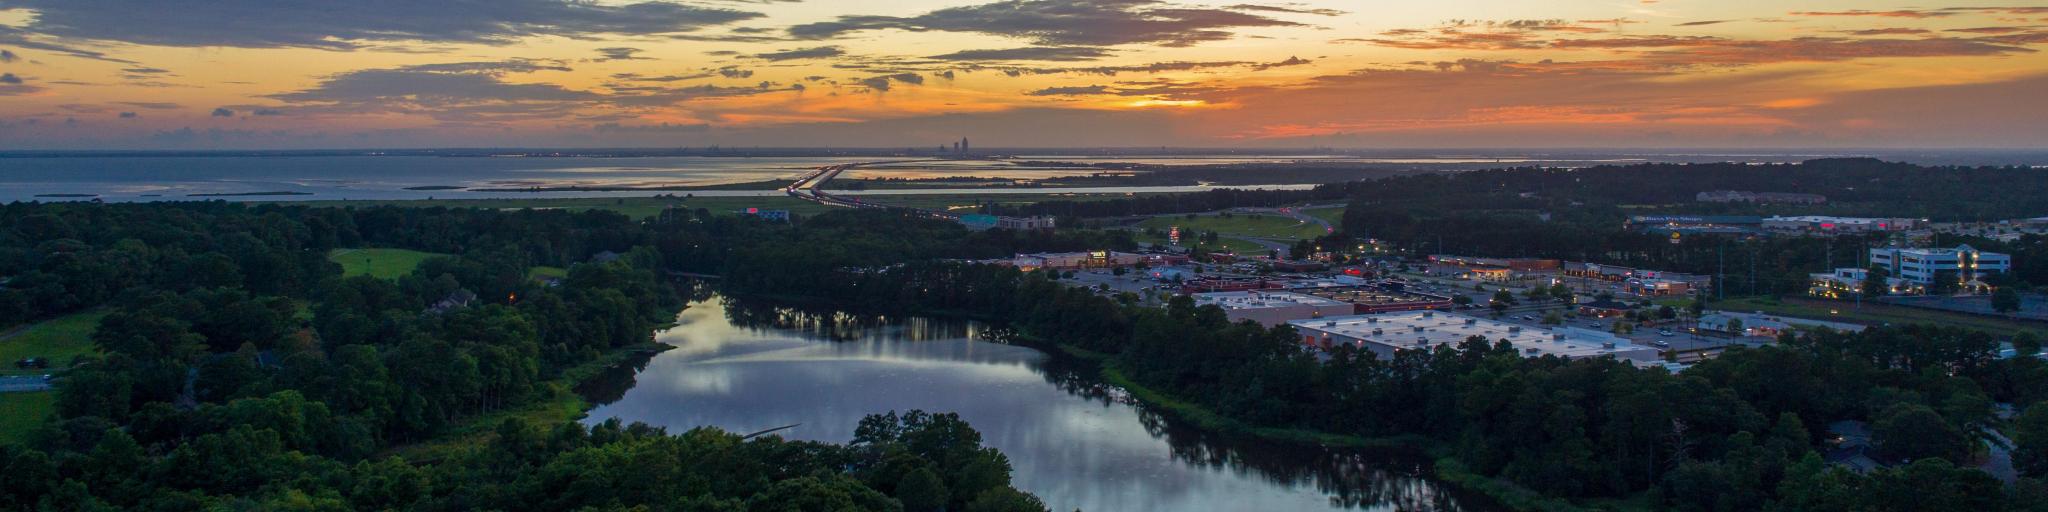 Aerial view of Lake Forest near Daphne, Alabama at sunset